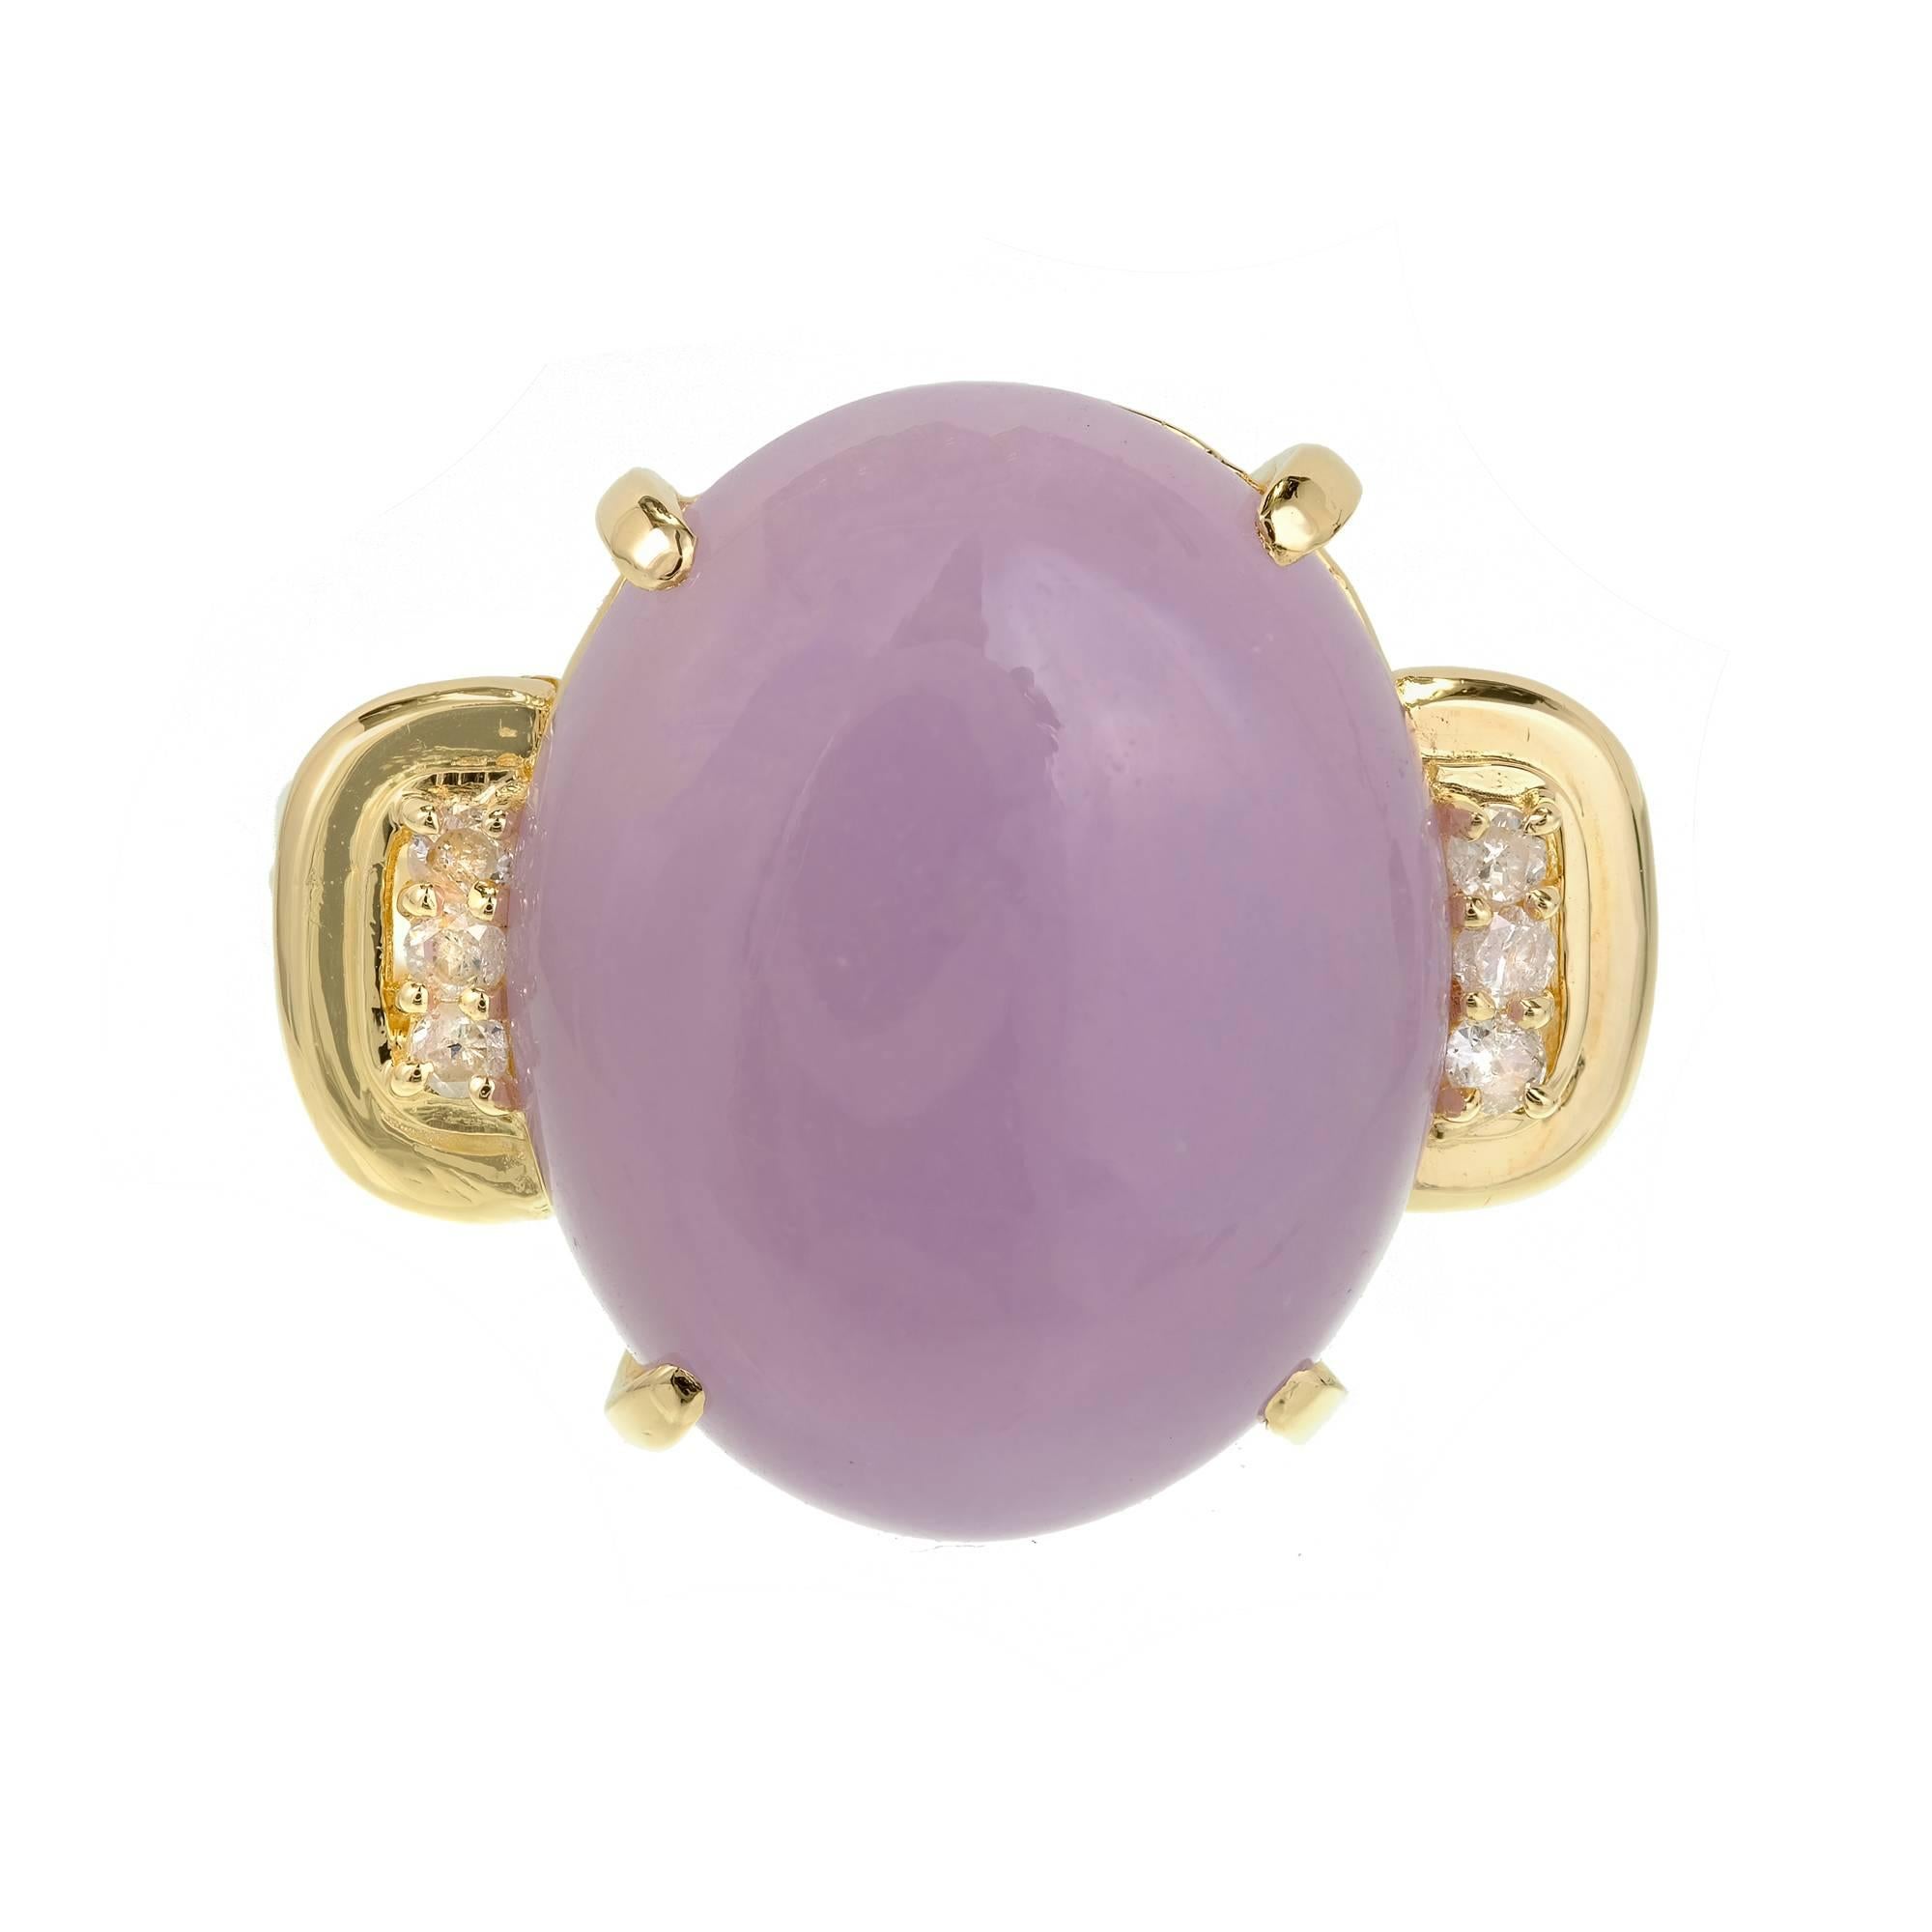 Natural translucent purple cabochon Jadeite Jade and diamond cocktail ring. Custom made 14k yellow gold ring with Diamond accents. 

1 oval purple cabochon Jadeite Jade, 17.66 x 14.24 x 5.39mm
6 full cut Diamonds, approx. total weight .10cts, H,